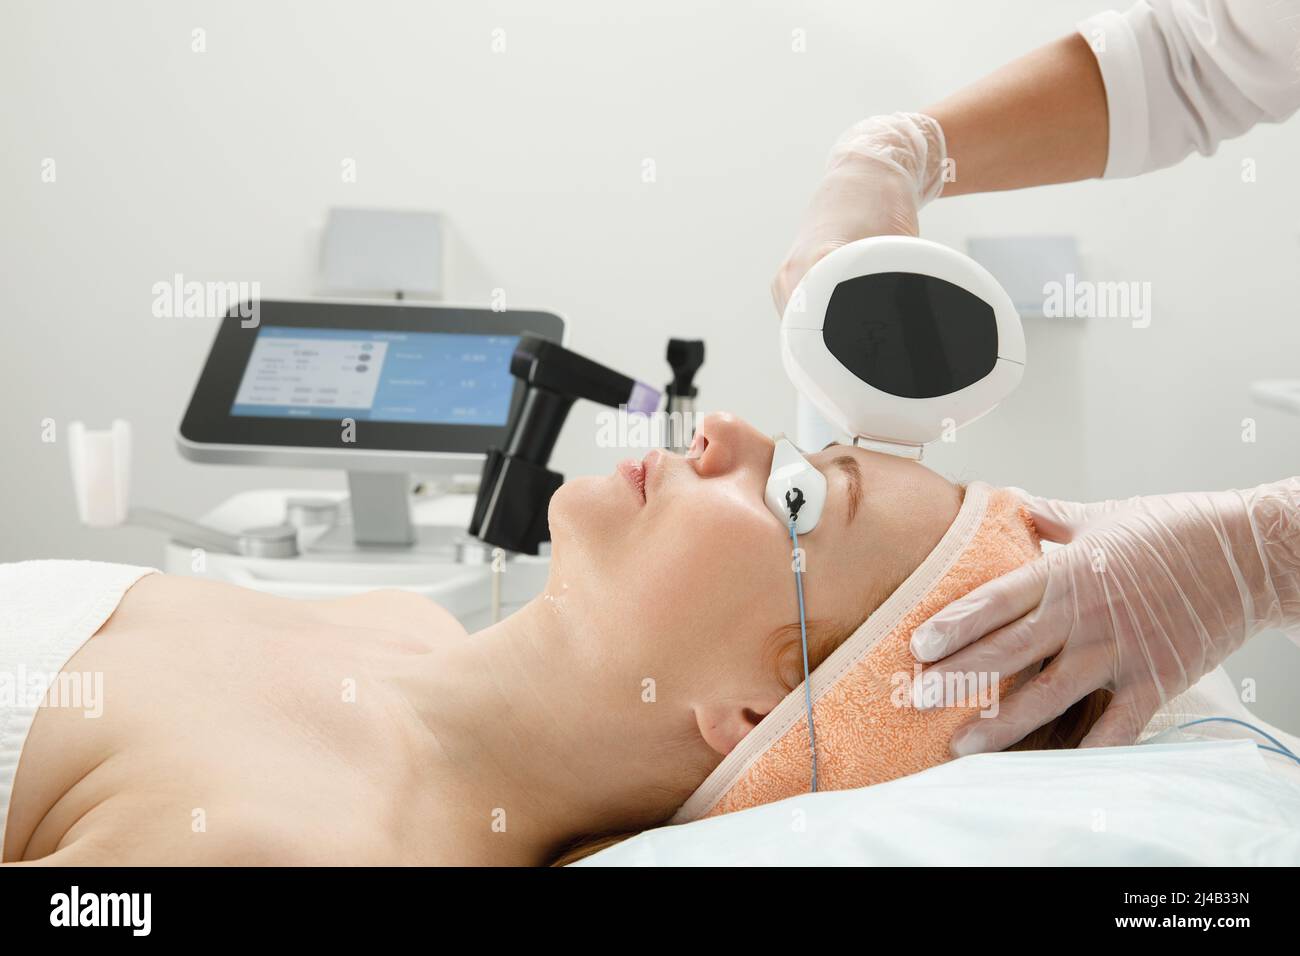 A woman receives laser treatment of the face in a cosmetology clinic, a concept of skin rejuvenation is being developed. laser peeling Stock Photo